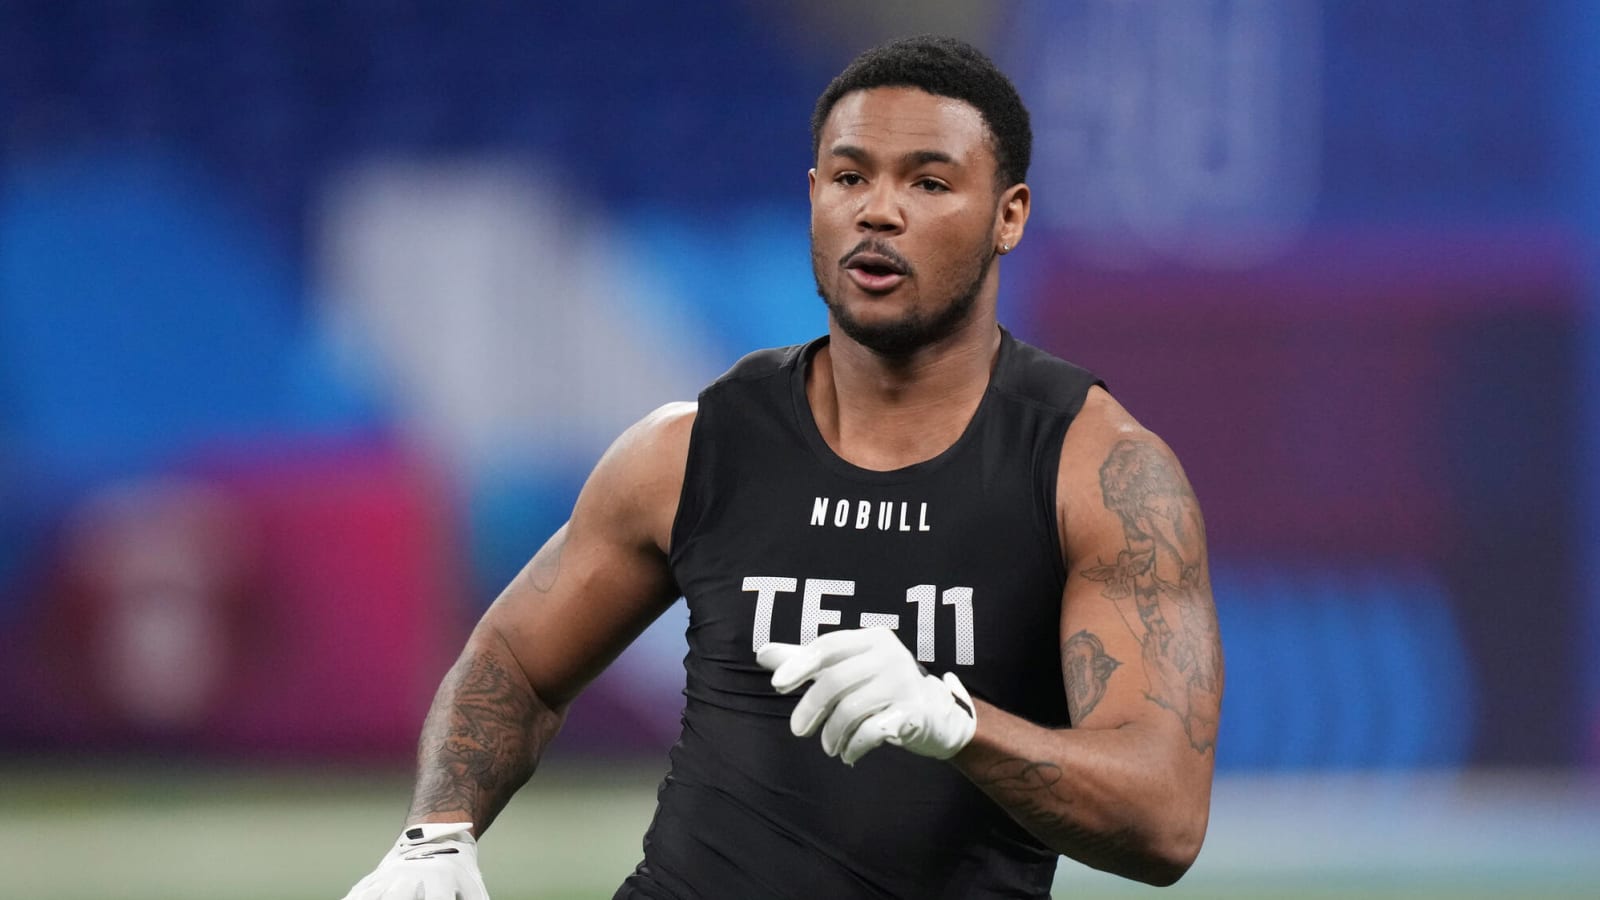 NFL Draft Day 3 Sleepers: 10 Potential Starters